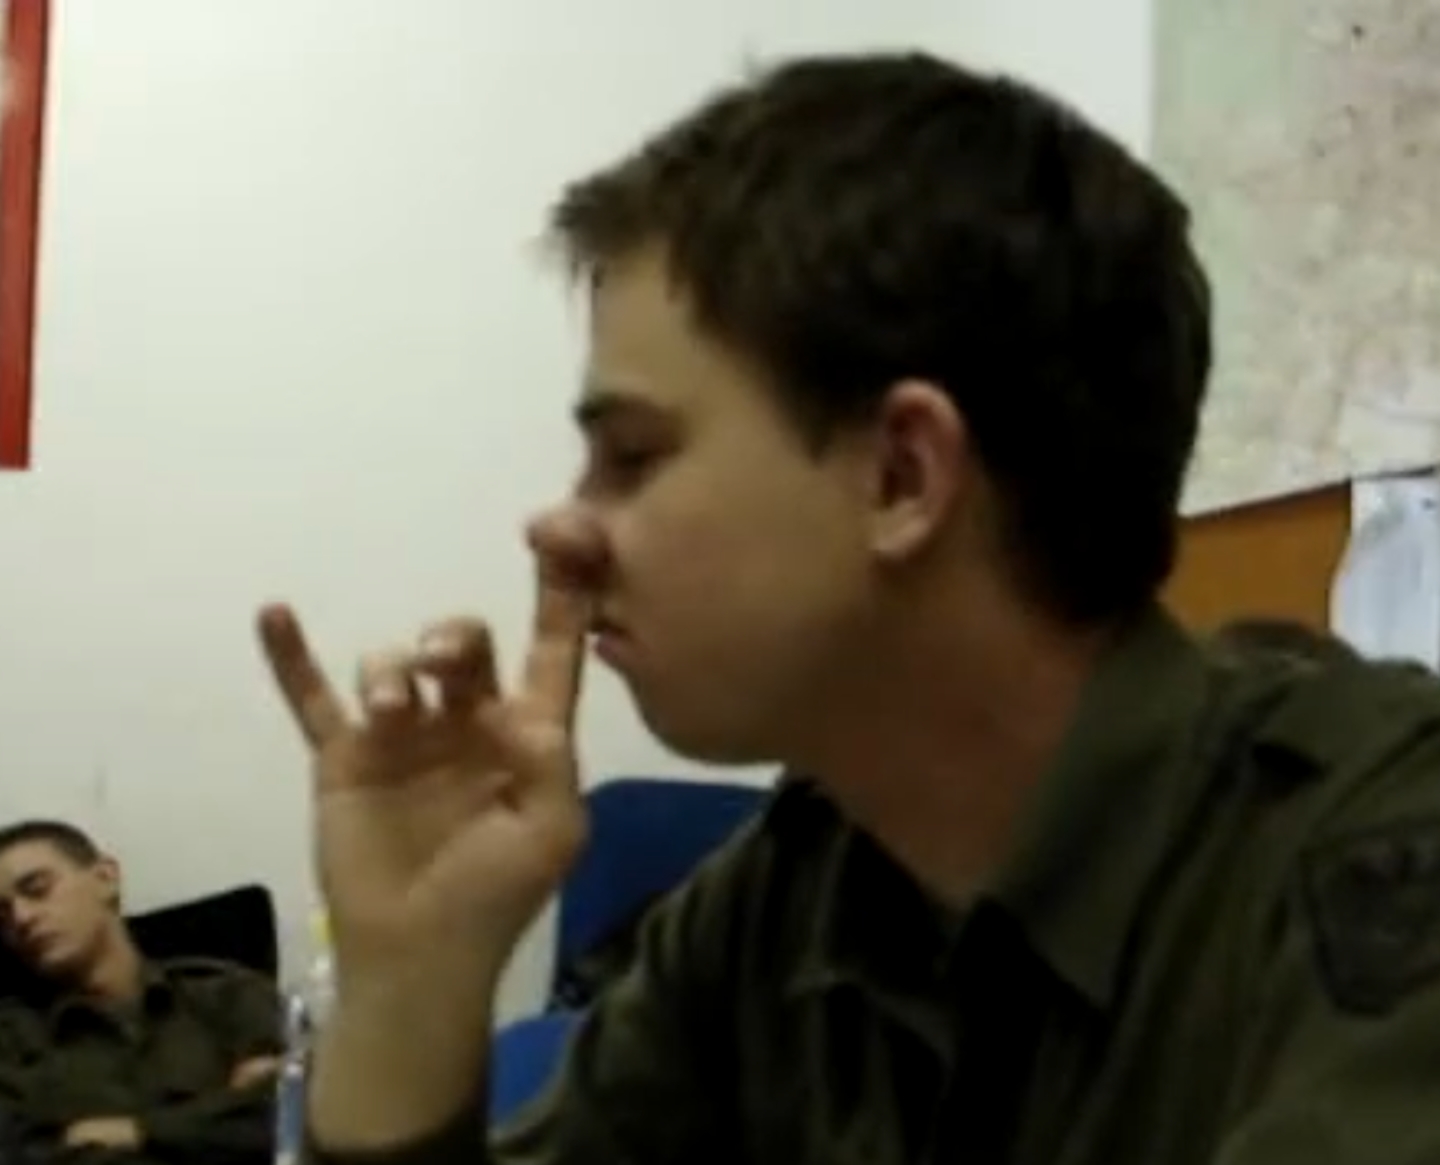 Some very good nose picking